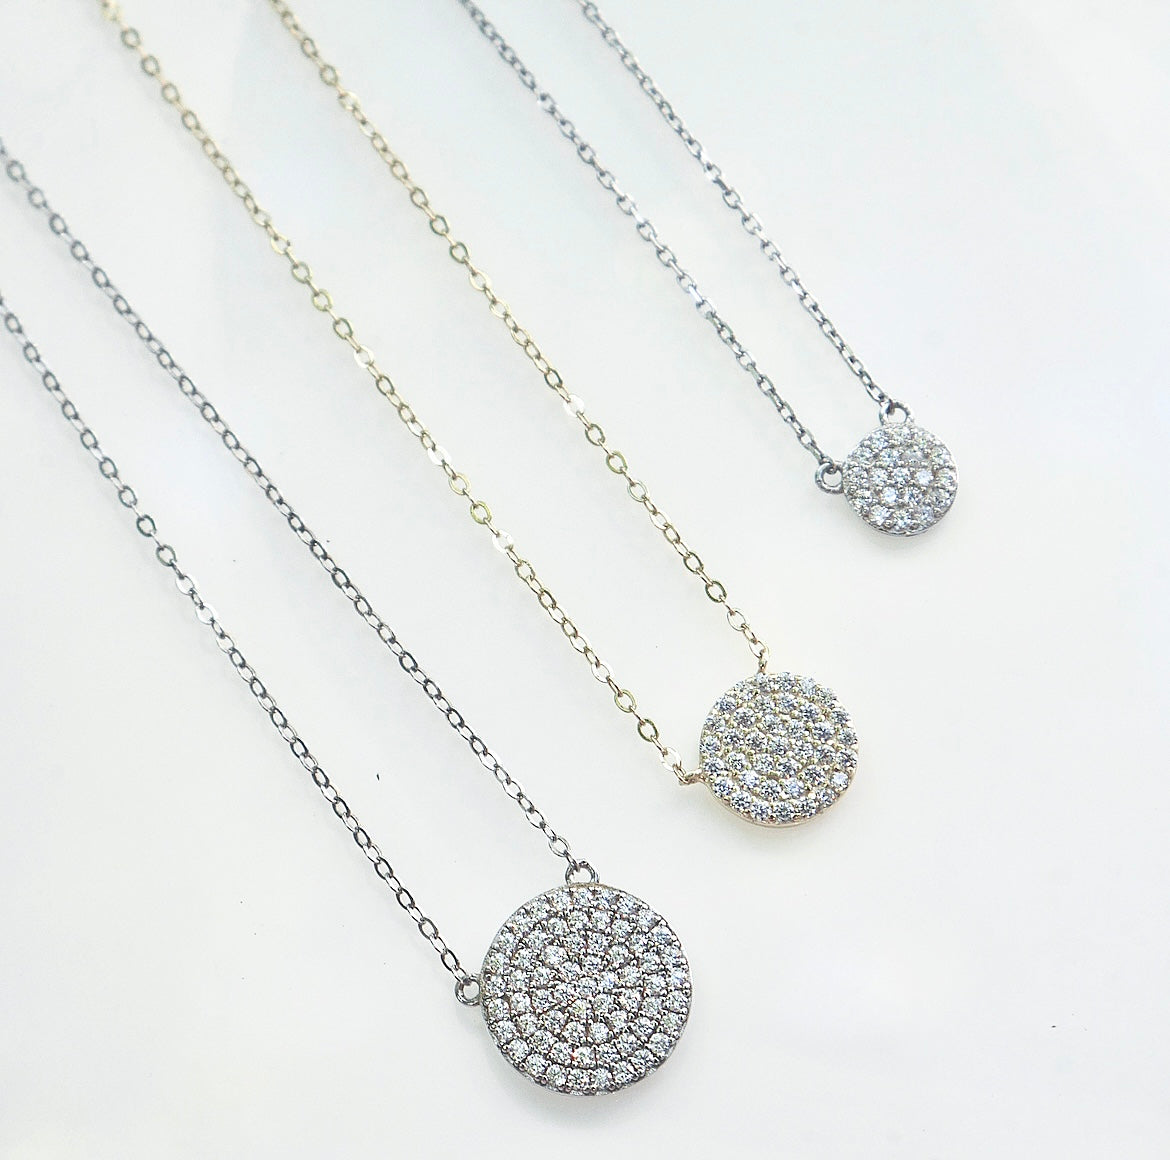 Circle Diamond pave CZ Cubic zirconia .925 sterling silver necklaces waterproof large circle tiny circle rhinestone necklace that wont turn green shopping in Miami, jewelry store in Brickell Kesley Boutique cute dainty necklaces Layering necklace ideas necklaces for layering birthday gift holiday gift ideas trending outift ideas influencer outfits and jewelry 